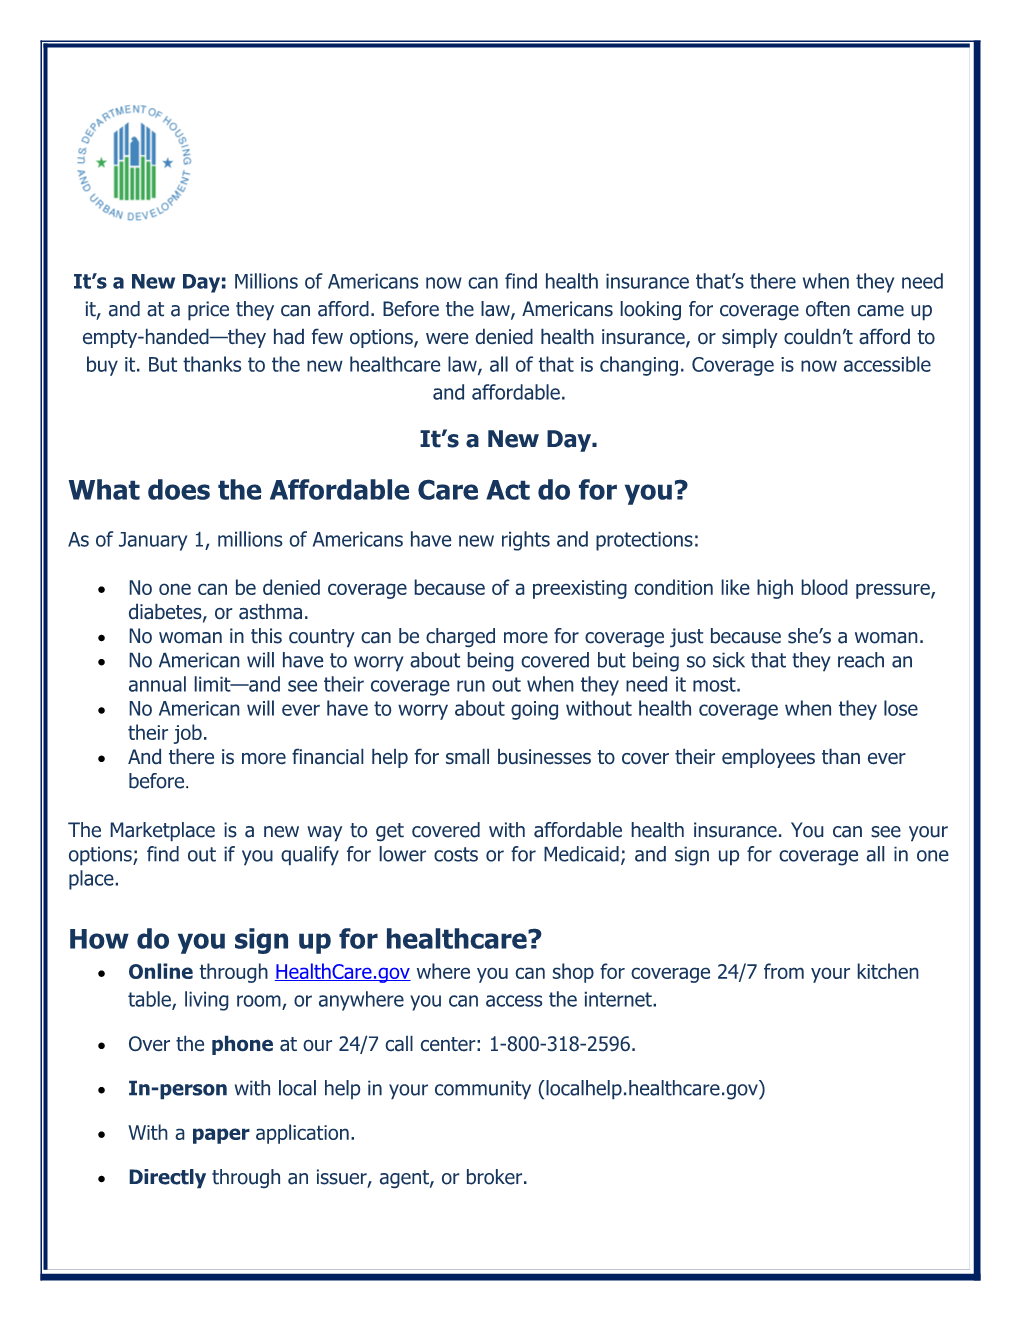 What Does the Affordable Care Act Do for You?